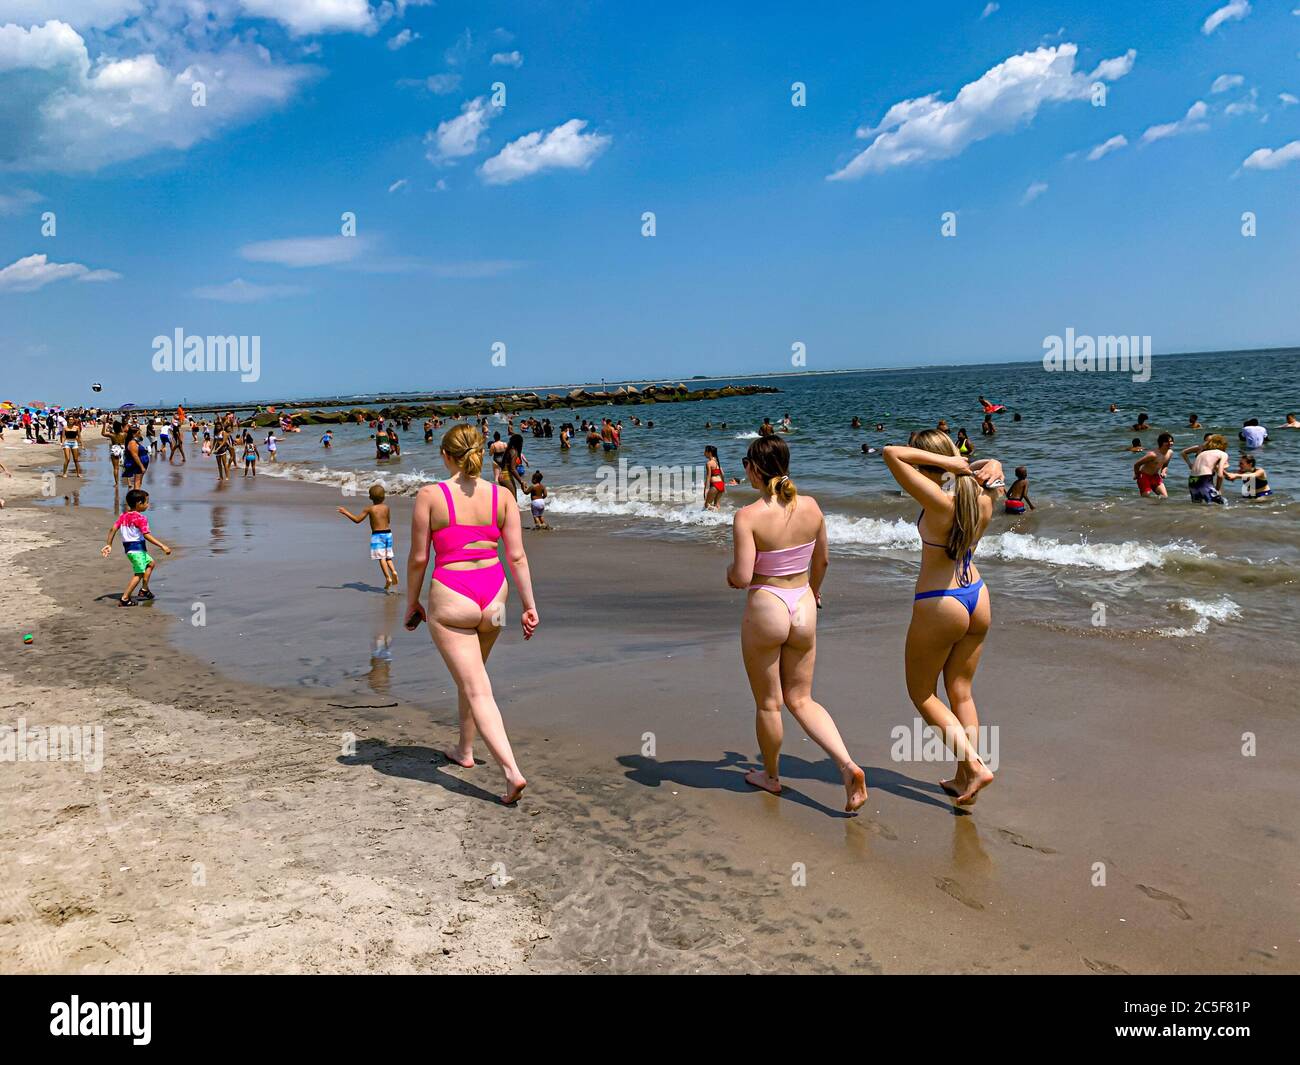 New York, New York, USA. 2nd July, 2020. NEW) Reopening of beaches in New York City. July 2, 2020, Coney Island, Brooklyn, New York, USA: Movement of people at Coney Island in Brooklyn . The beaches in New York were reopened yesterday (01) after lockdown because of the Covid-19 pandemic that struck the city. However, most of the people are not using masks. Credit: Niyi Fote /Thenews2. Credit: Niyi Fote/TheNEWS2/ZUMA Wire/Alamy Live News Stock Photo